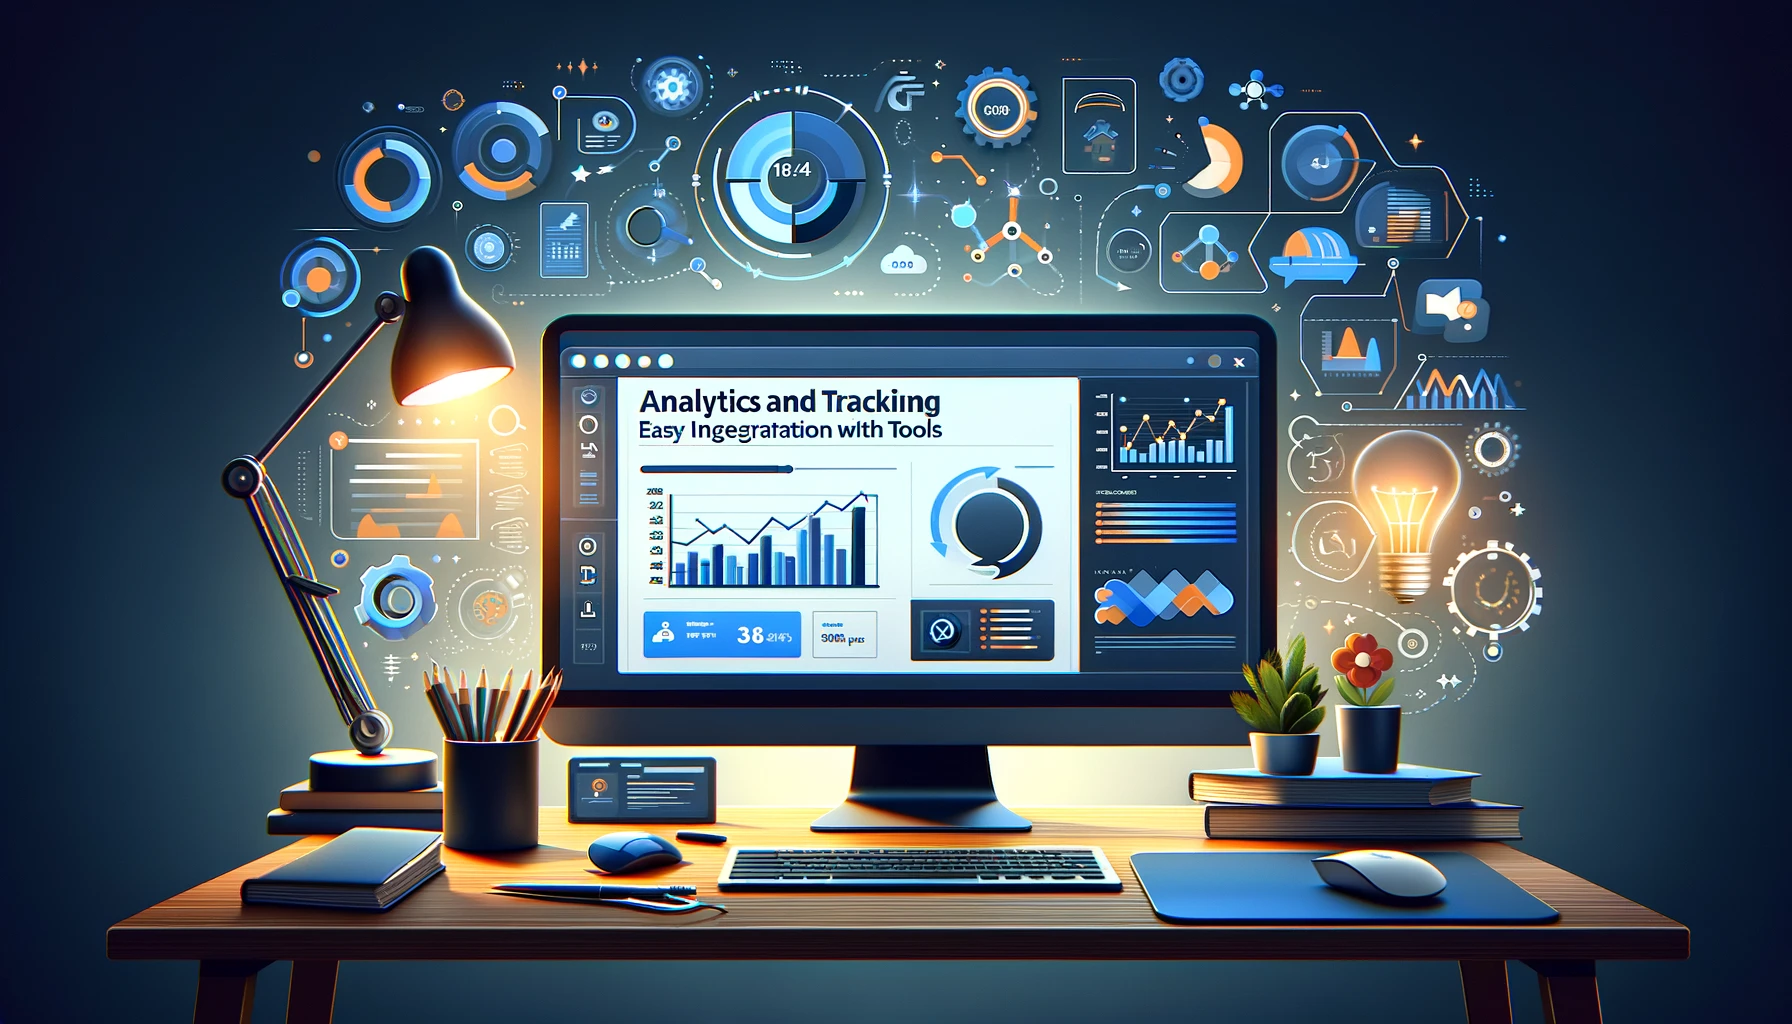 Image illustrating the 'Analytics and Tracking: Easy Integration with Tools' section, showing a modern workspace with a computer screen displaying analytics graphs, charts, and data points. This visual emphasizes the ease of integrating analytics tools for website performance monitoring in a streamlined, user-friendly manner, set against a professional yet inviting color scheme.